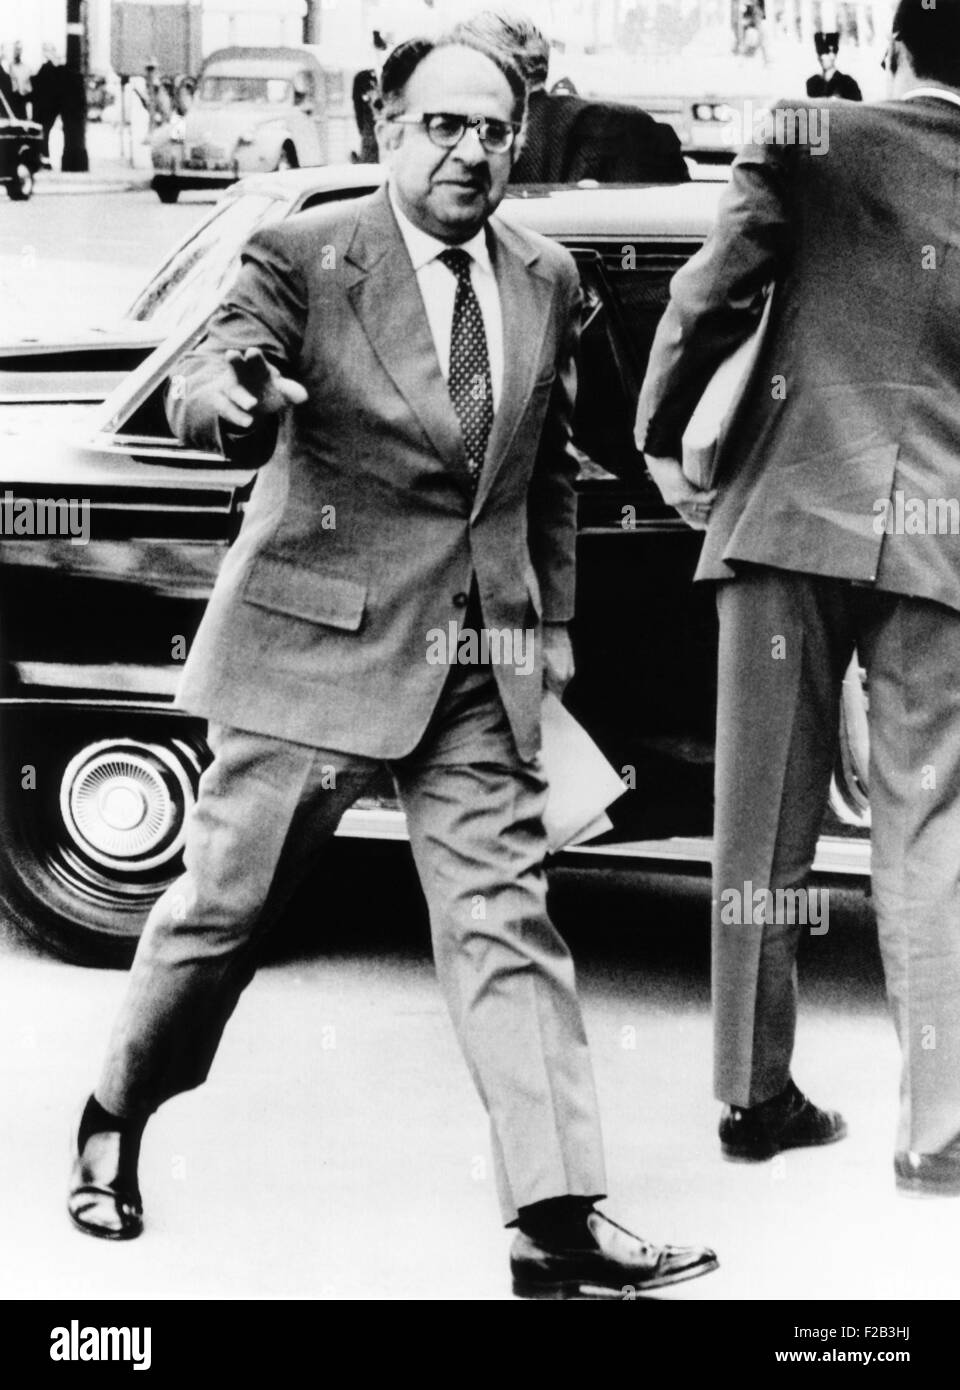 Philip Habib, head of the U.S. delegation to the Paris Peace Talks, arriving for the 127th session. August 26, 1971. The talks to end the Vietnam War would reach a conclusion in Jan. 1973. - (CSU 2015 6 205) Stock Photo